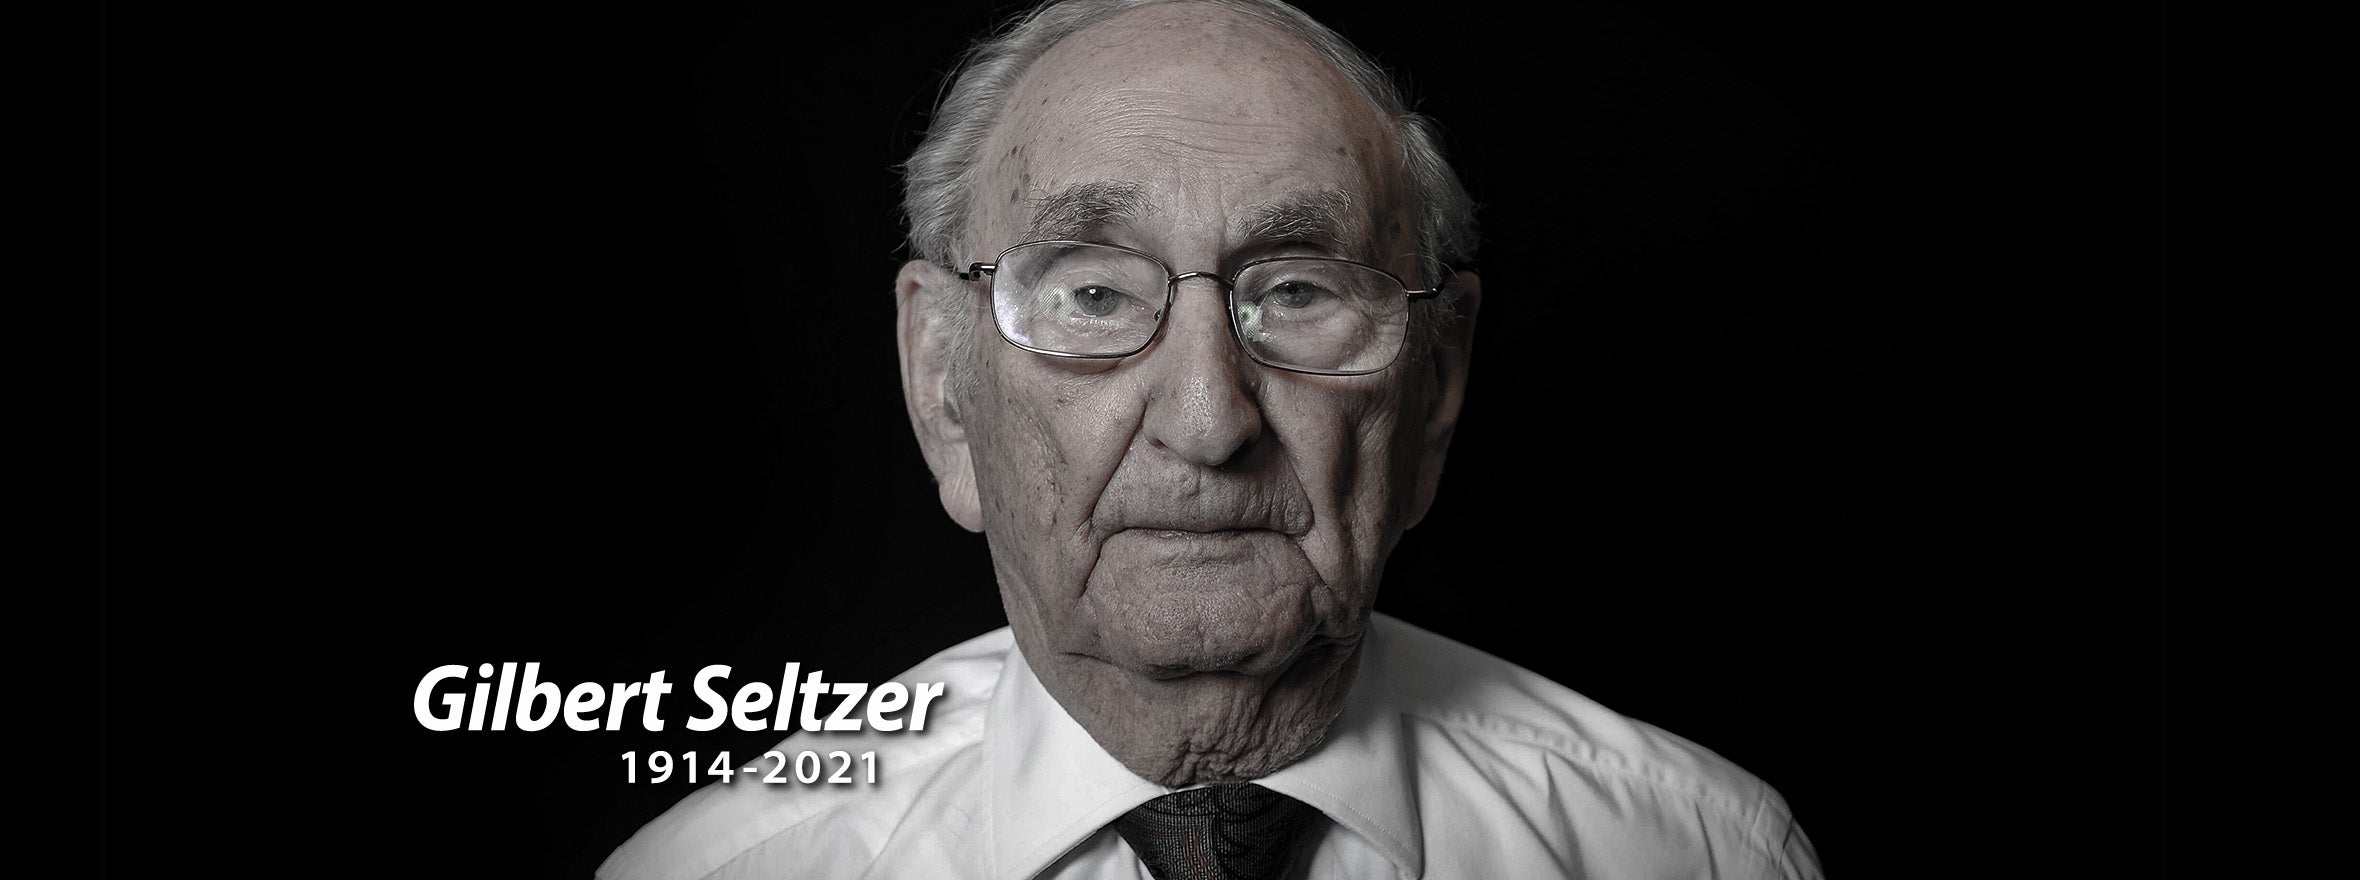 REMEMBERING GILBERT SELTZER, LEAD ARCHITECT OF AUD